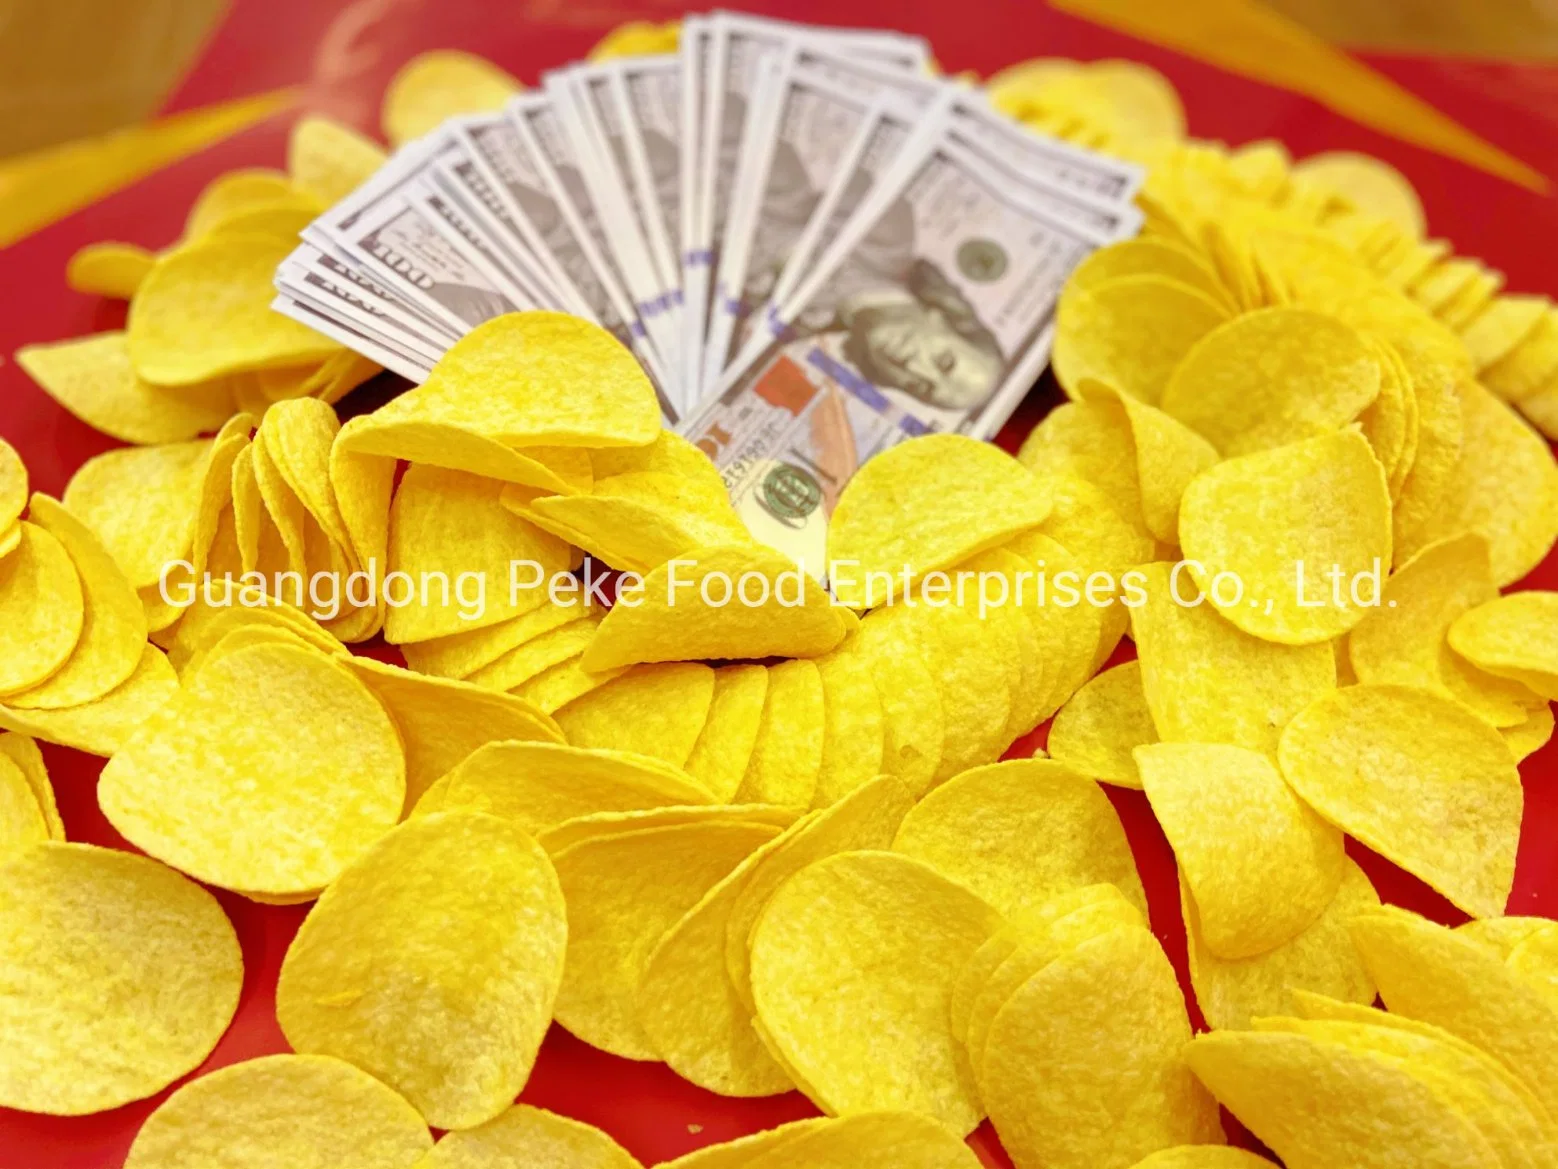 Jelly Best Selling Partner - Potato Chips Potato Crisps Tortilla Corn Chips Canned Food Popcorn Puffed Food Snacks with Halal (ISO/HACCP/BRC/FDA APPROVED)